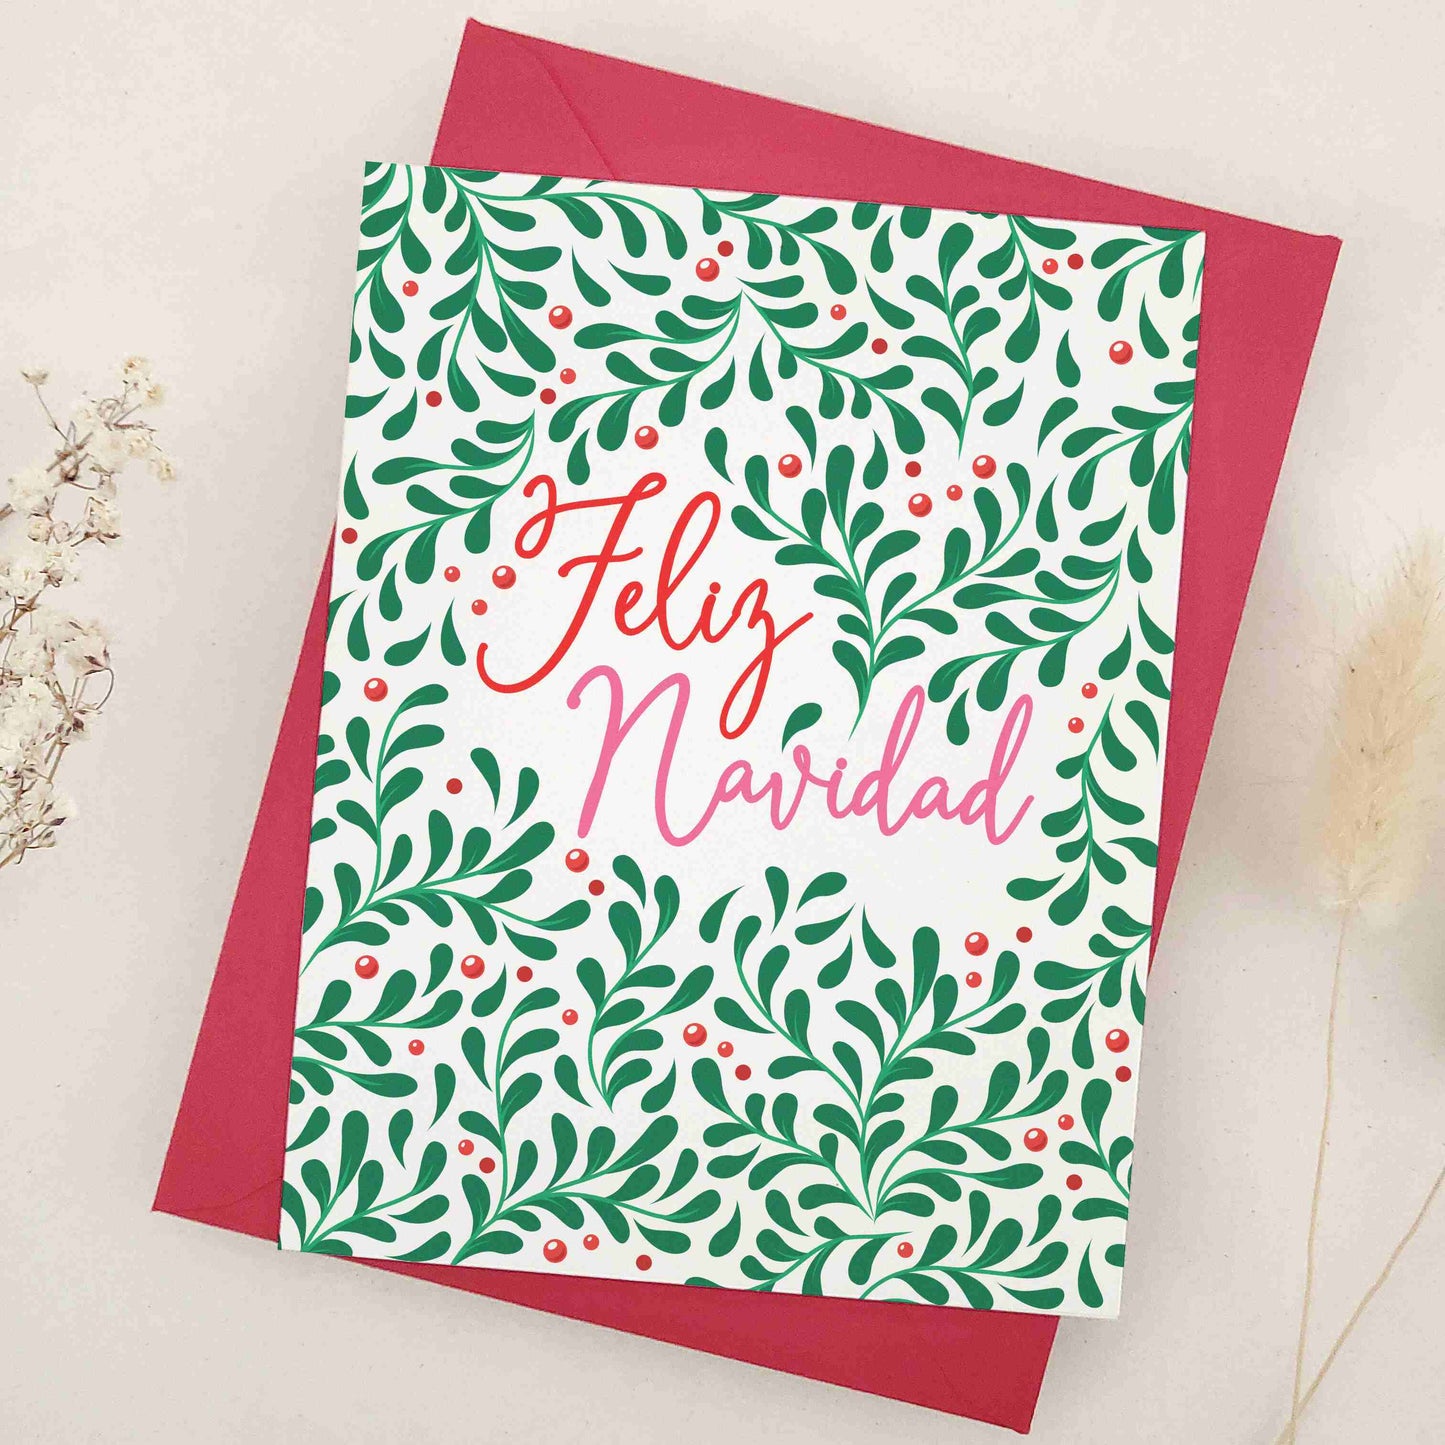 Vibrant 'Feliz Navidad' card, richly decorated with a lush pattern of greenery and berries, embodying the traditional charm and warmth of Hispanic culture. The design, symbolizing life and joy, is a heartwarming choice for conveying holiday wishes, offering a visually stunning and meaningful way to share season's greetings.